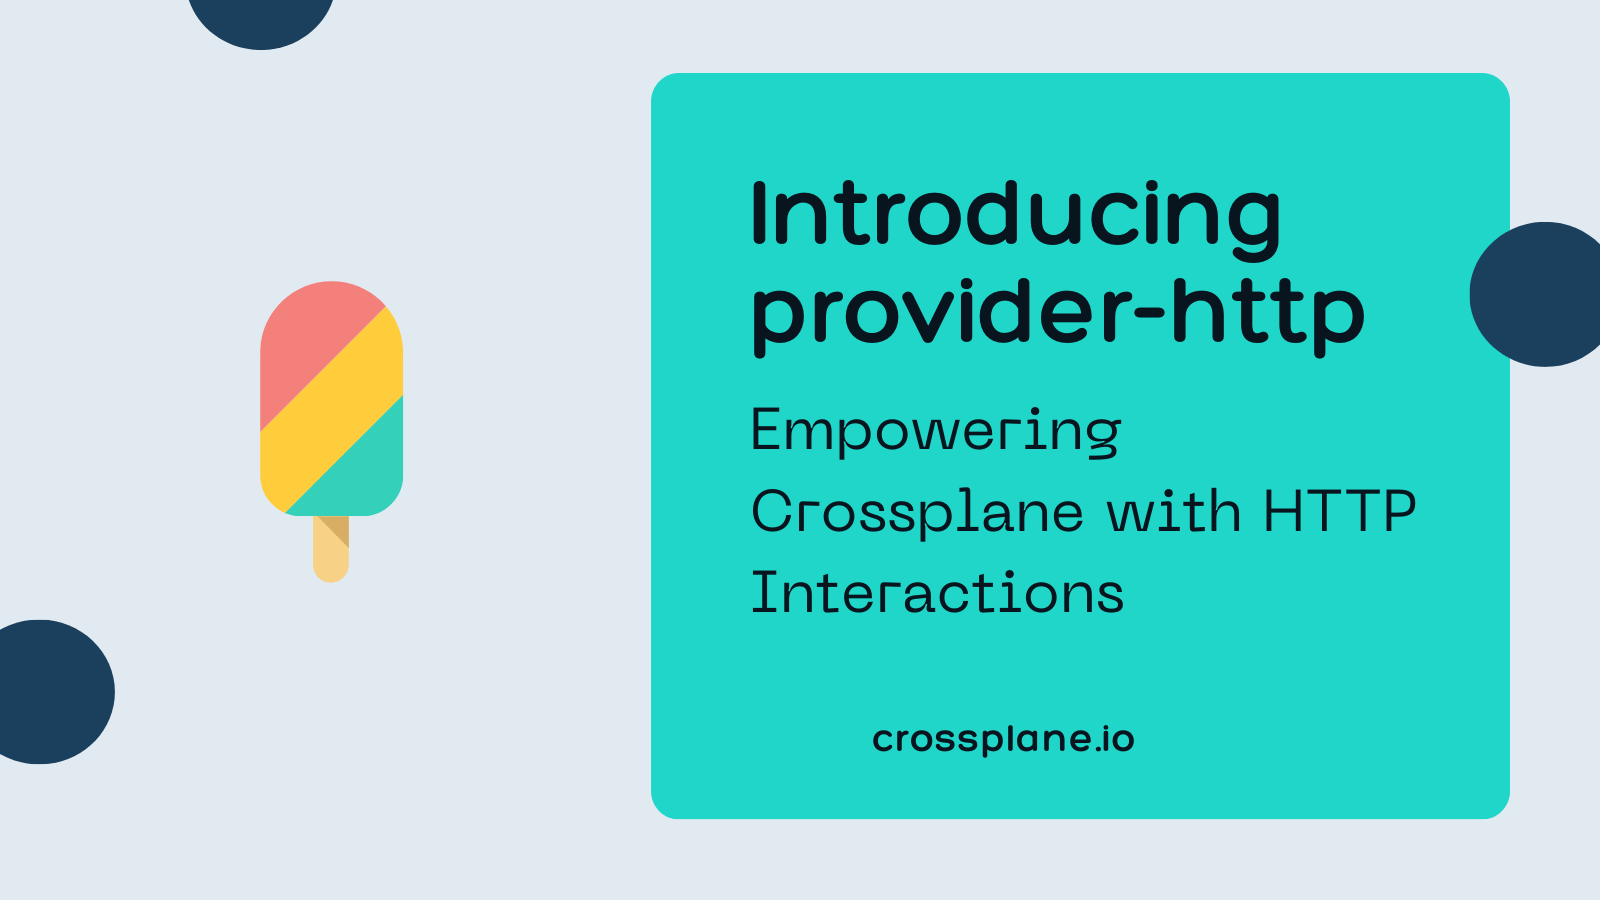 Introducing provider-http: Empowering Crossplane with HTTP Interactions